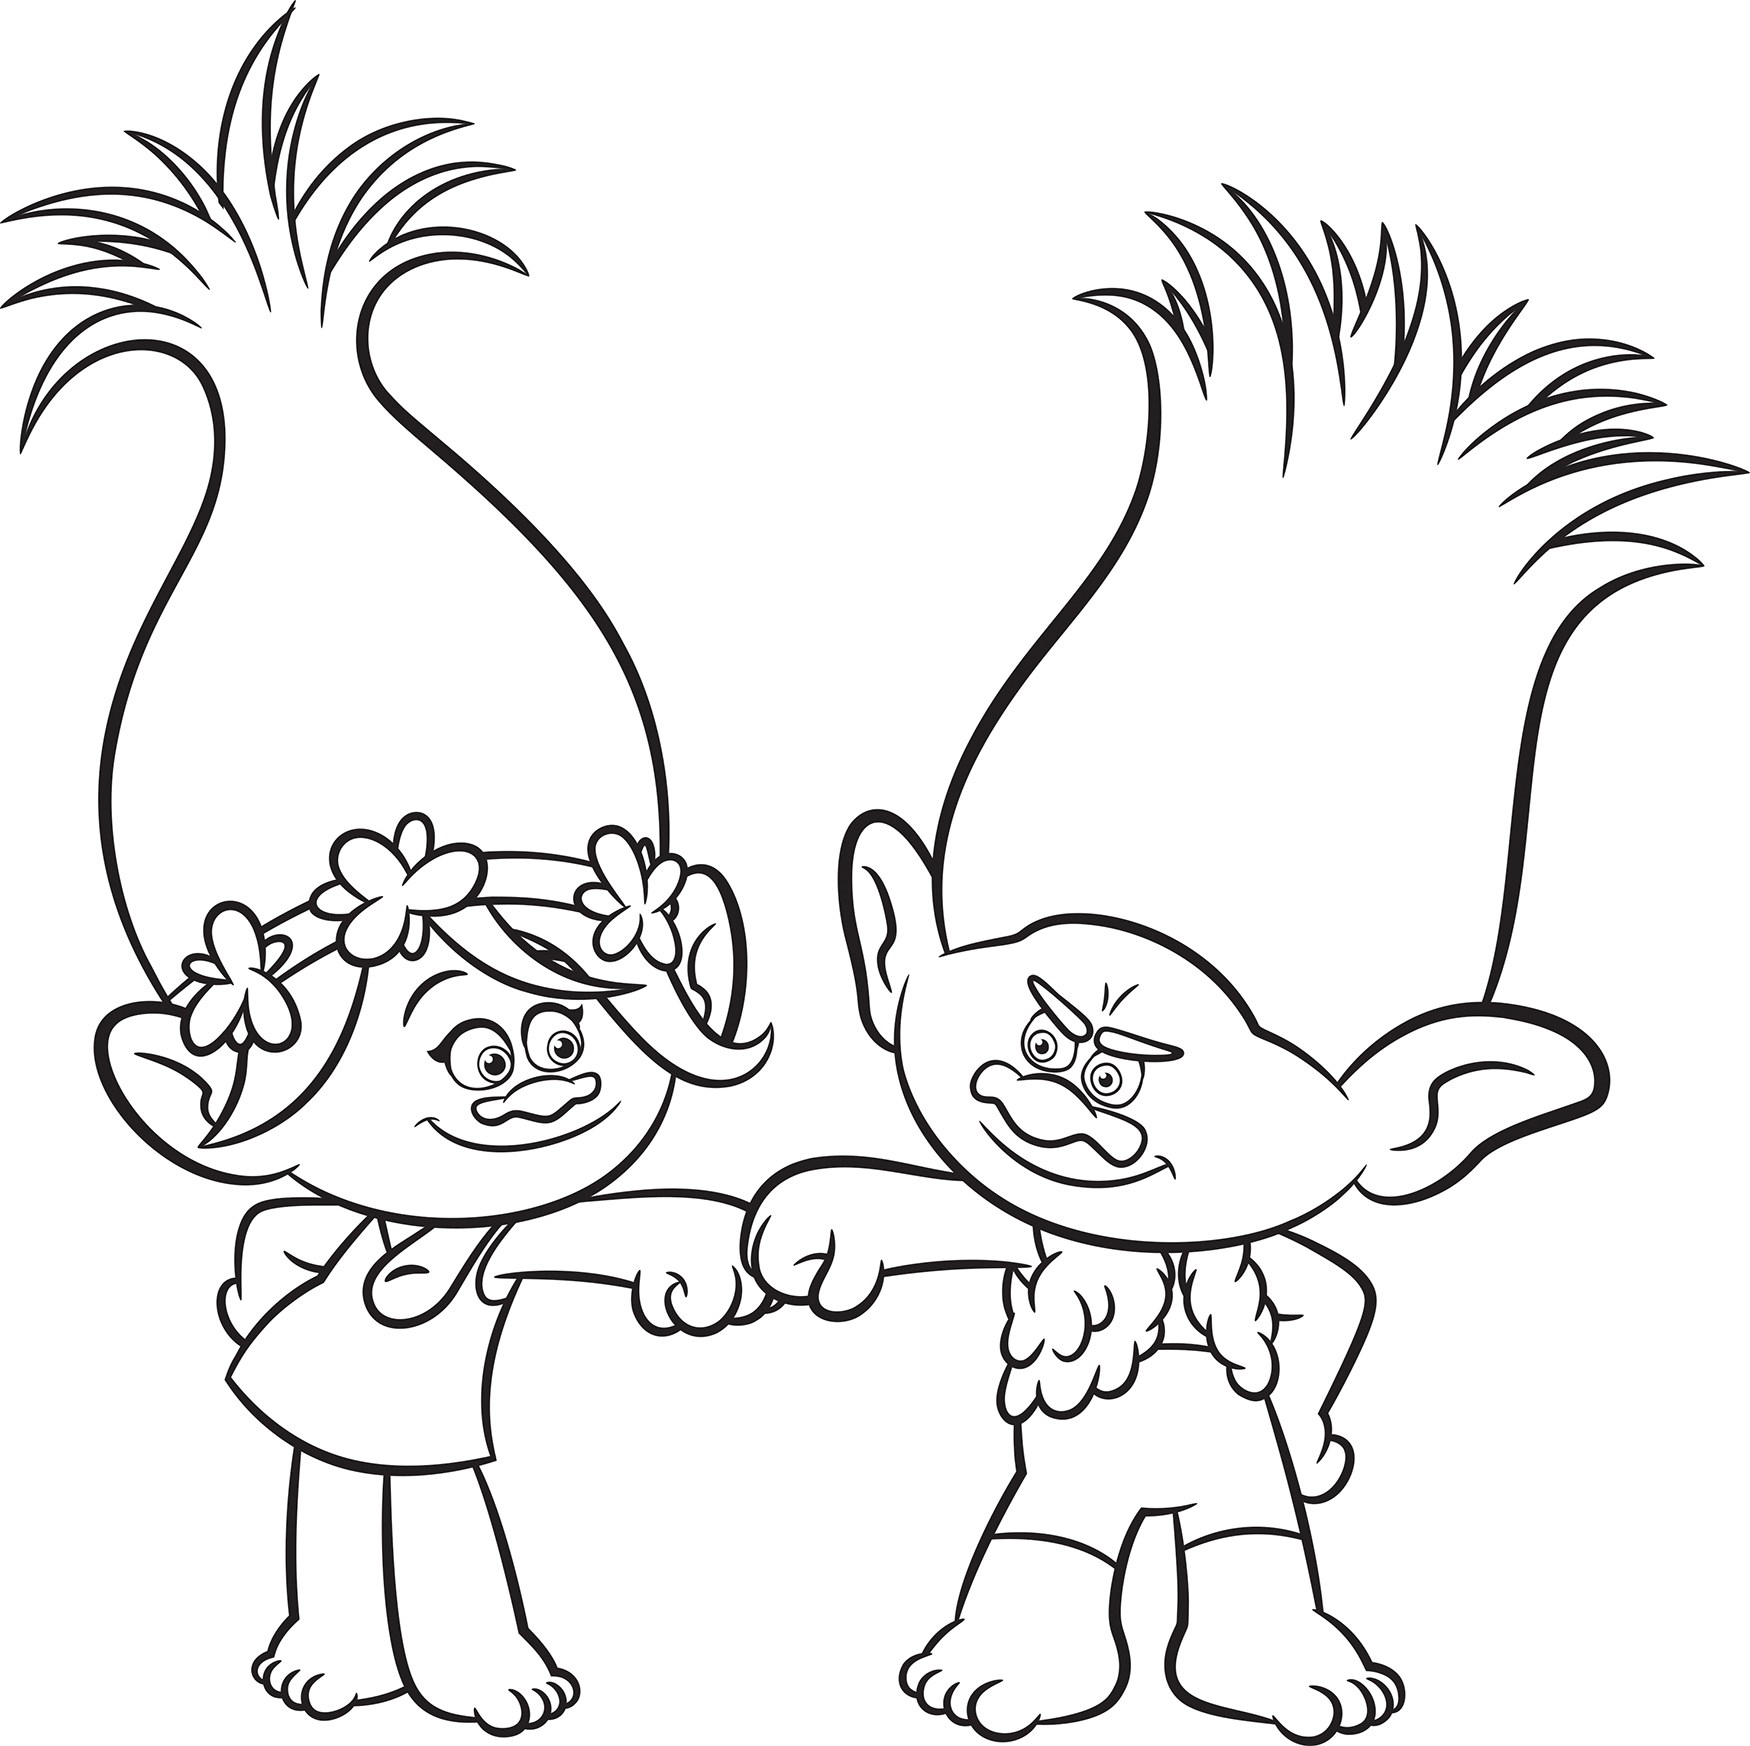 Download Trolls Movie Coloring Pages - Best Coloring Pages For Kids